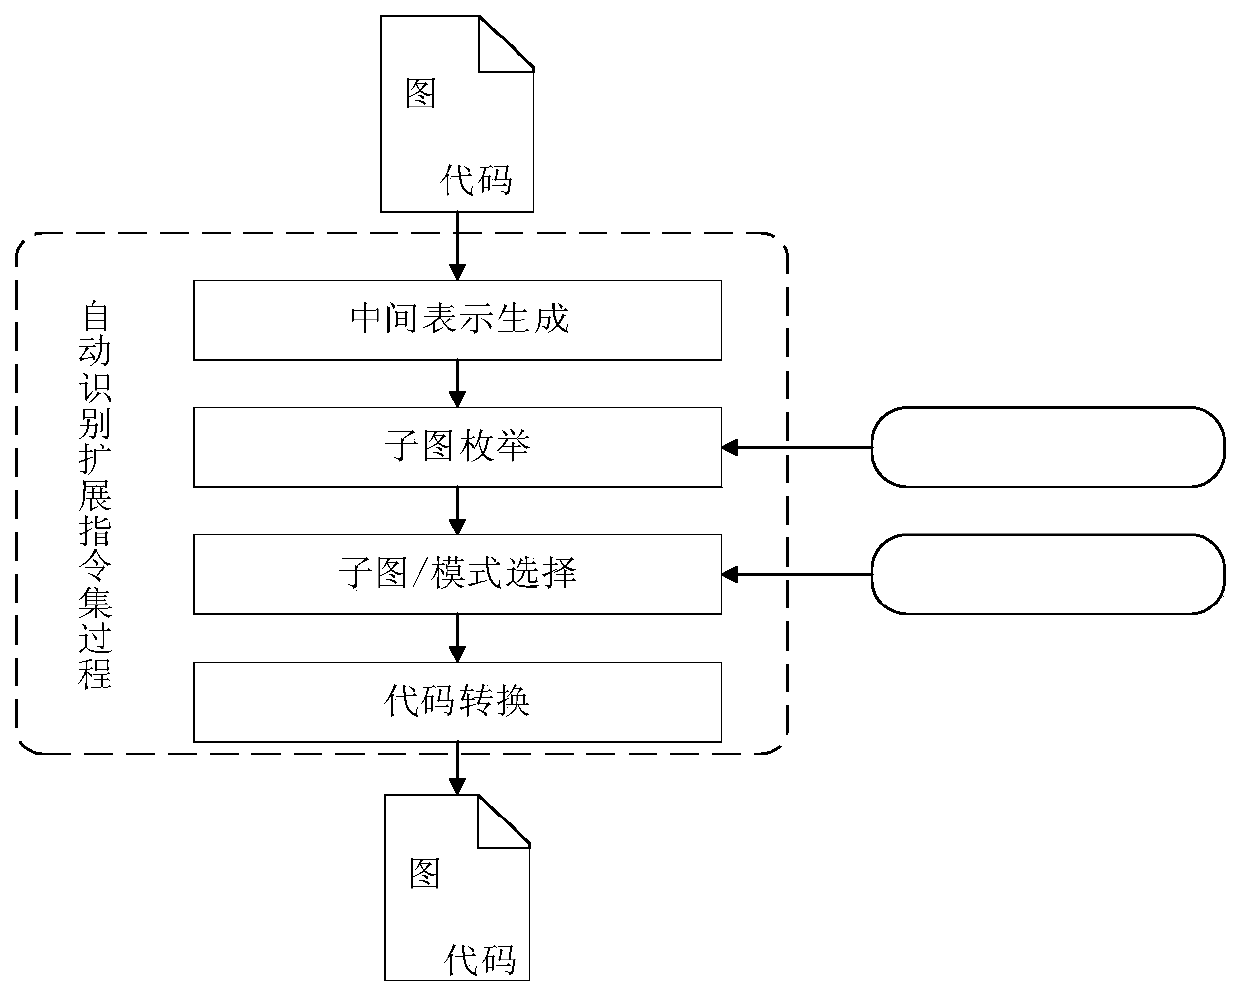 Self-defined instruction automatic identification method based on constraint planning